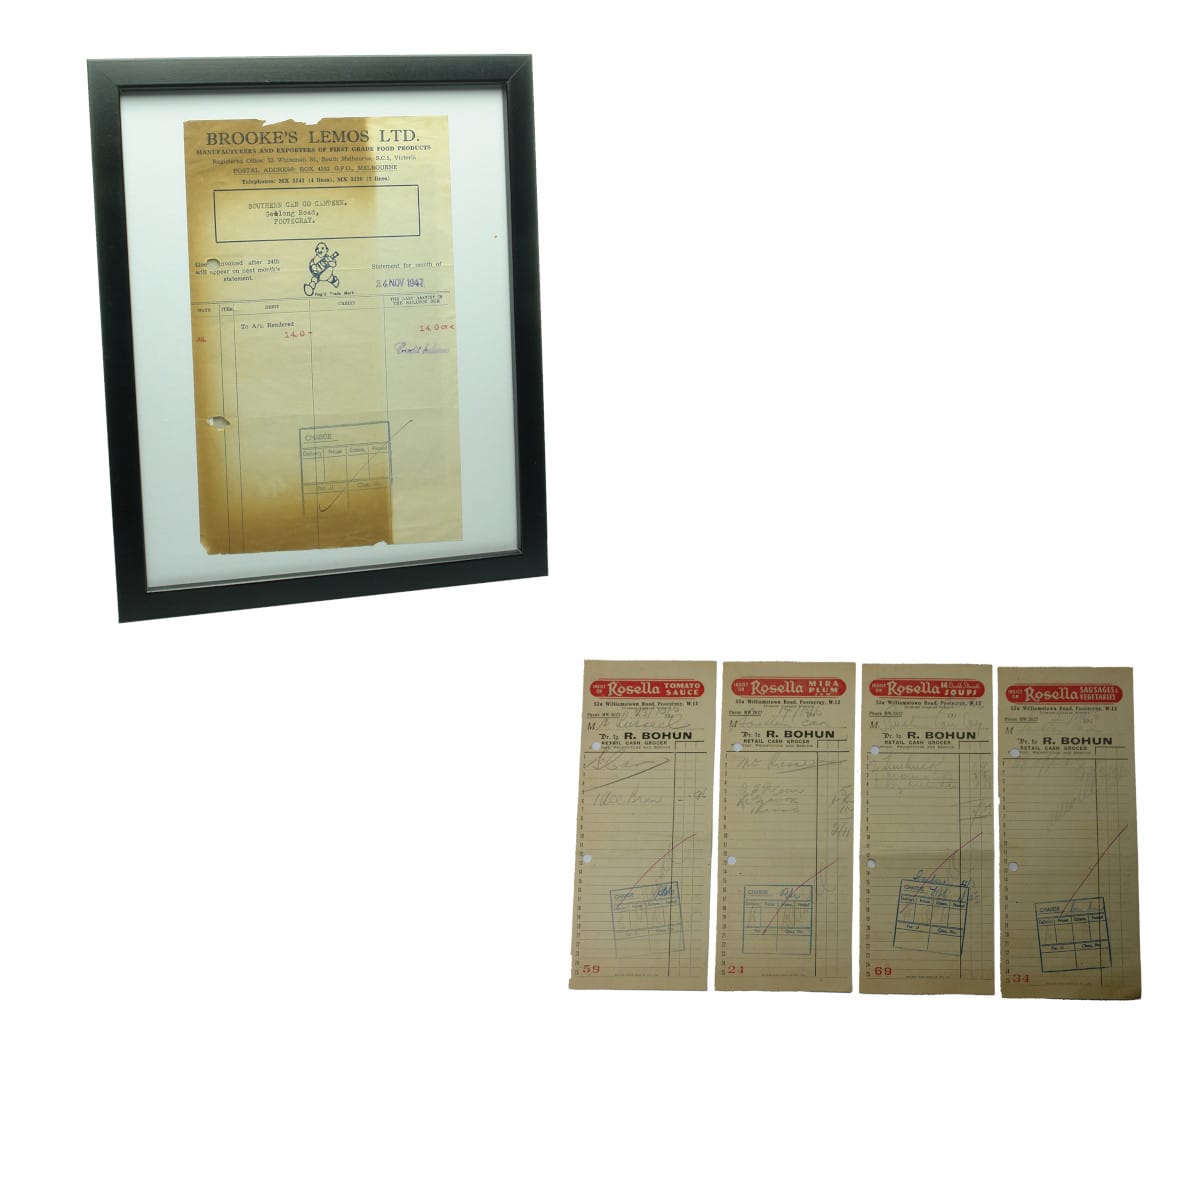 5 pieces of Ephemera. Brooke's Lemos framed Invoice, 1947. Four Different Dockets for R. Bohun, Footscray advertising Rosella Products. (Victoria)